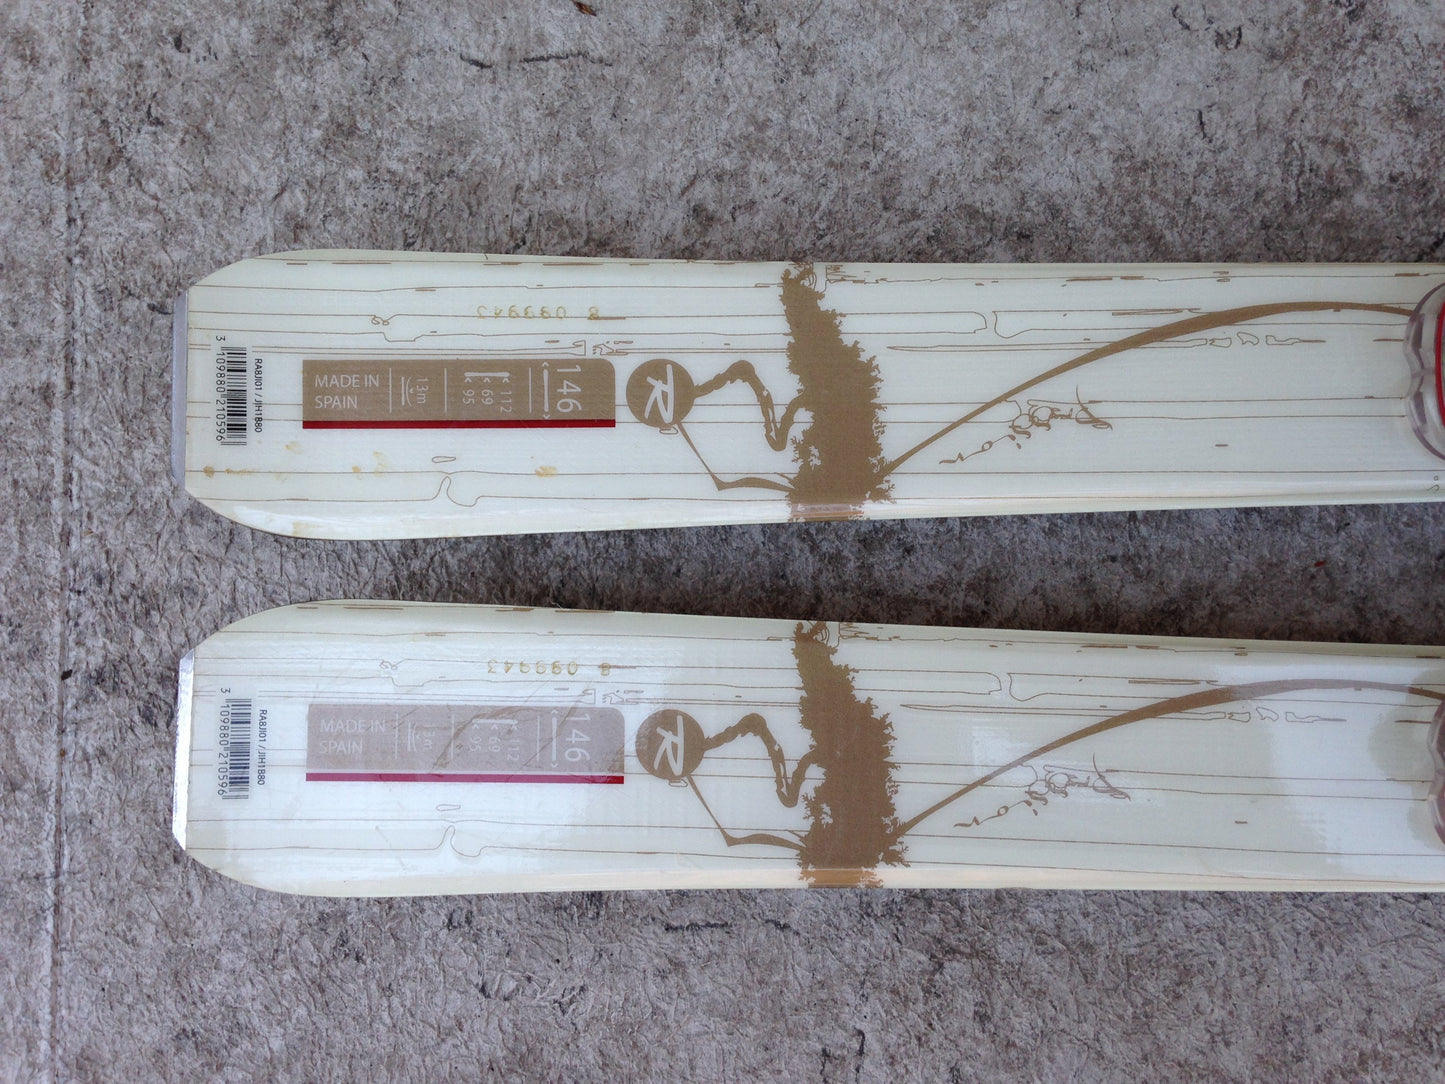 Ski 146 Rossignol Passion Vanilla and Gold Parabolic Excellent With Bindings